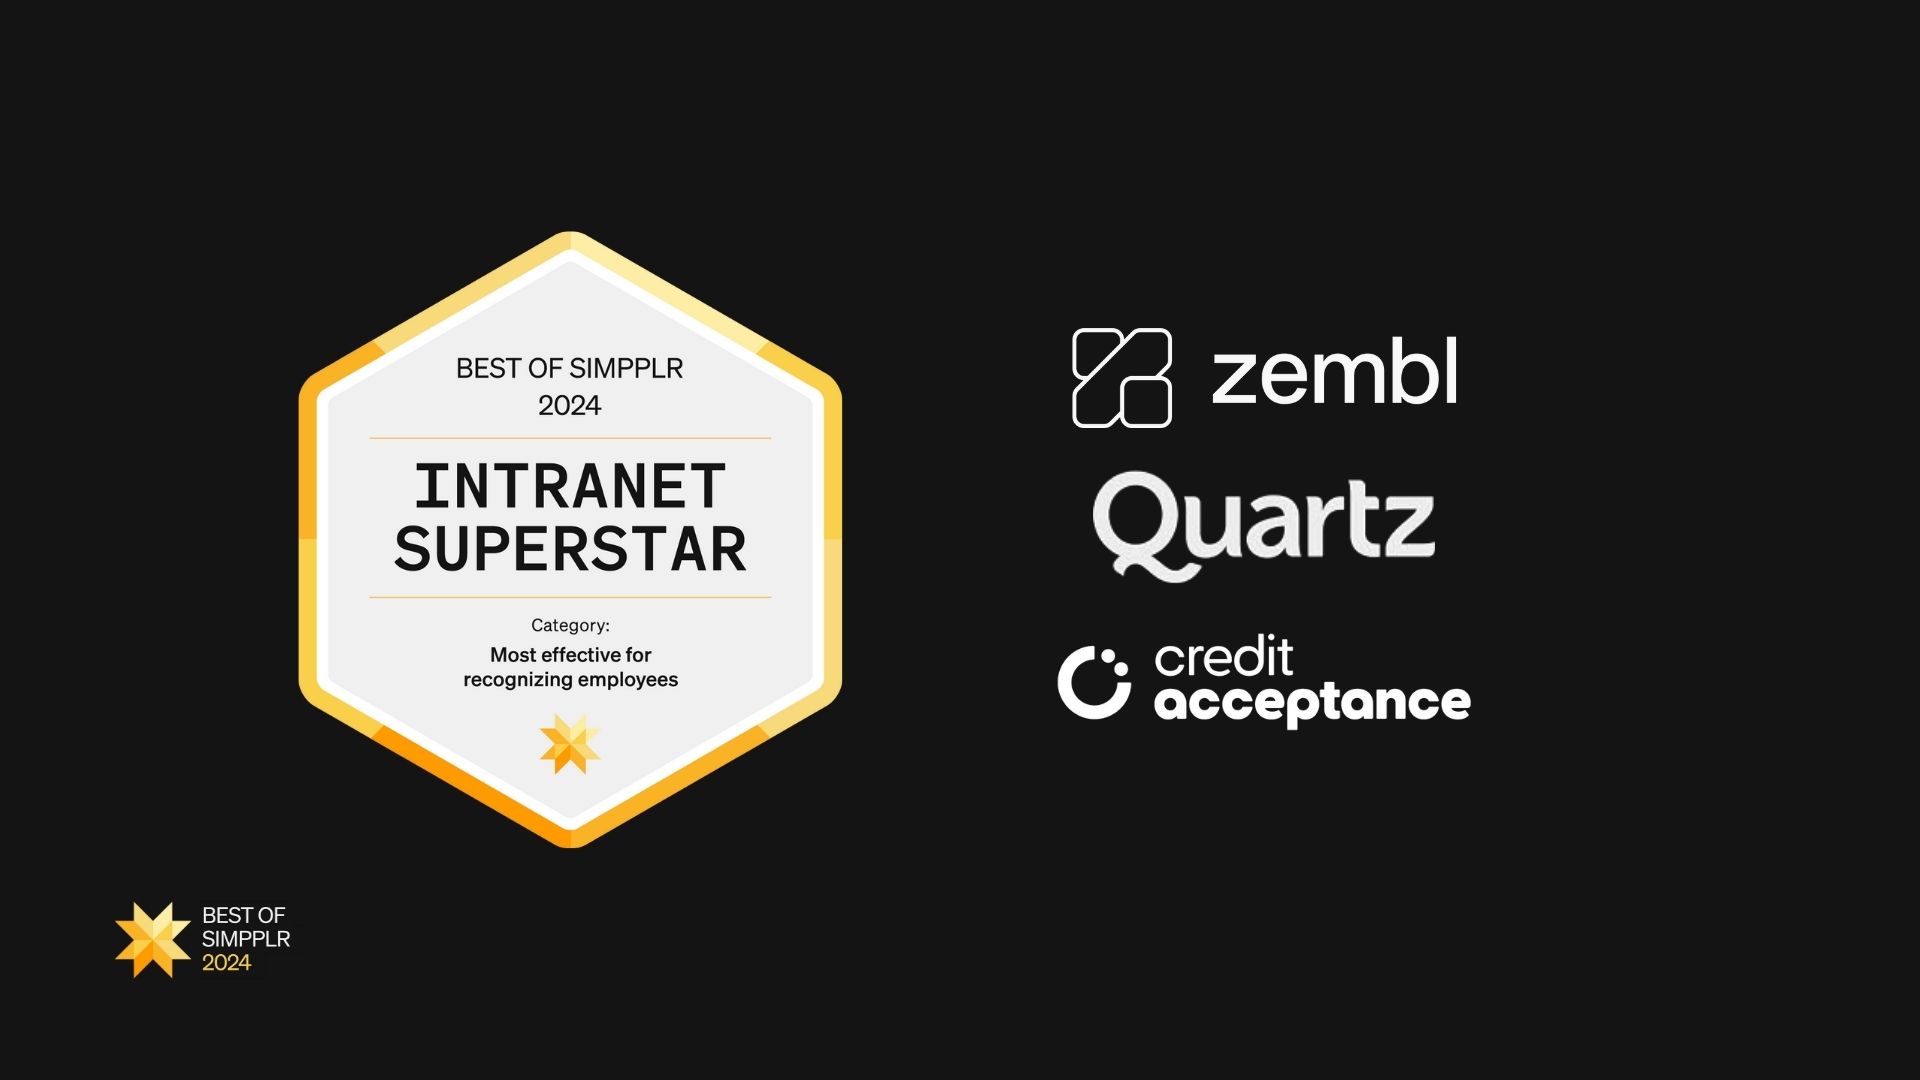 Best of Simpplr 2024 intranet contest winners - Most effective for recognizing employees: Quartz Health Solutions, Credit Acceptance, Zembl